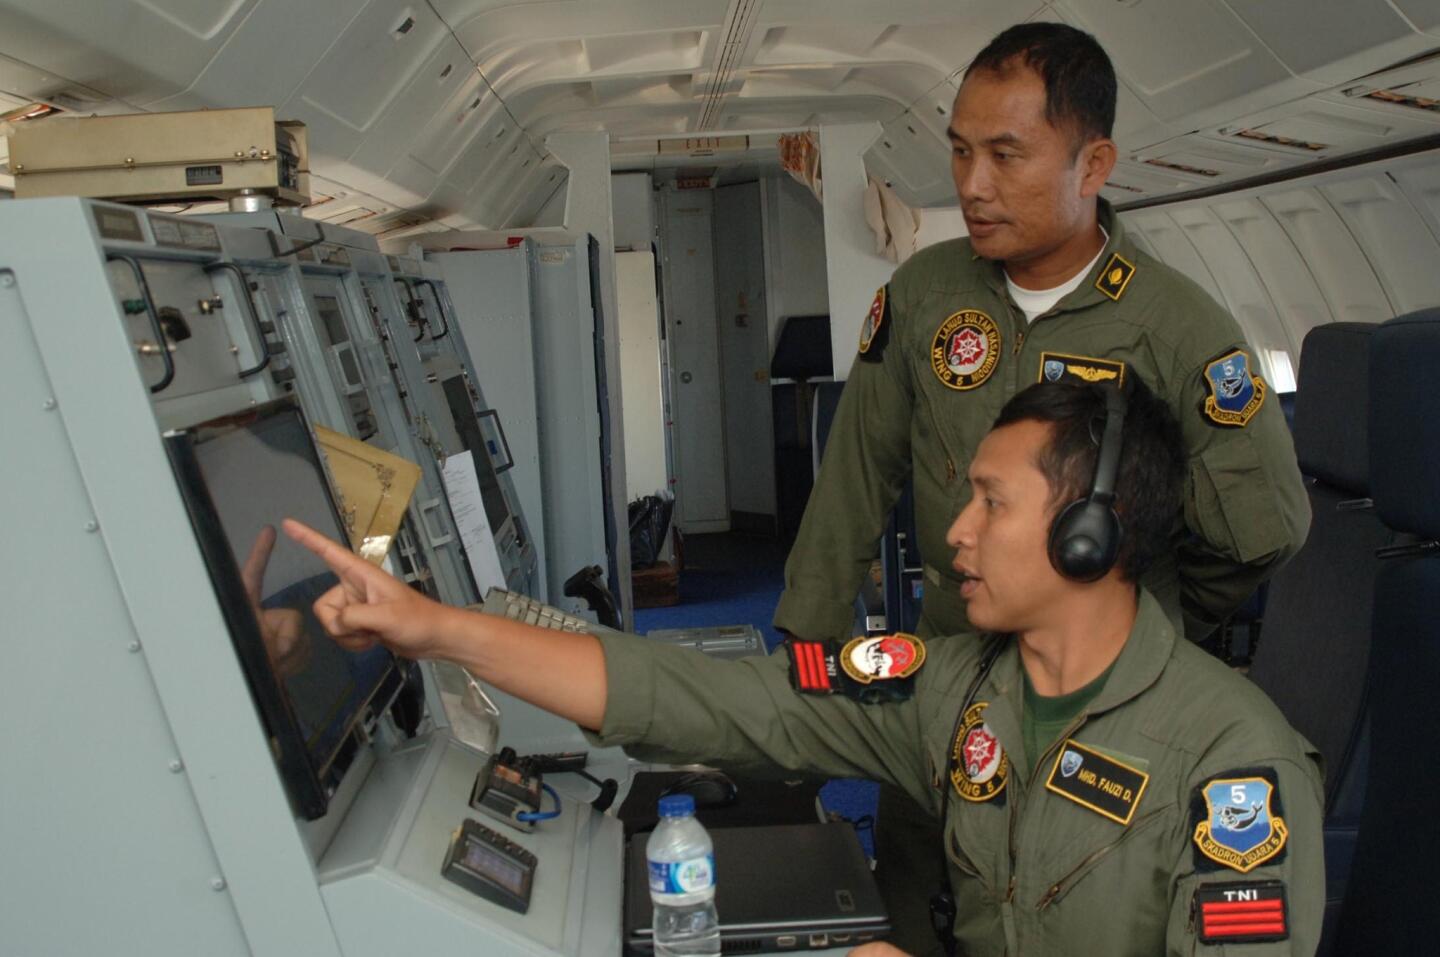 Indonesian Air Force personnel aboard an Indonesian Air Force military surveillance aircraft over the Malacca Strait, a sea passageway between Indonesia and Malaysia, while searching for the missing Malaysia Airlines flight MH370 plane.